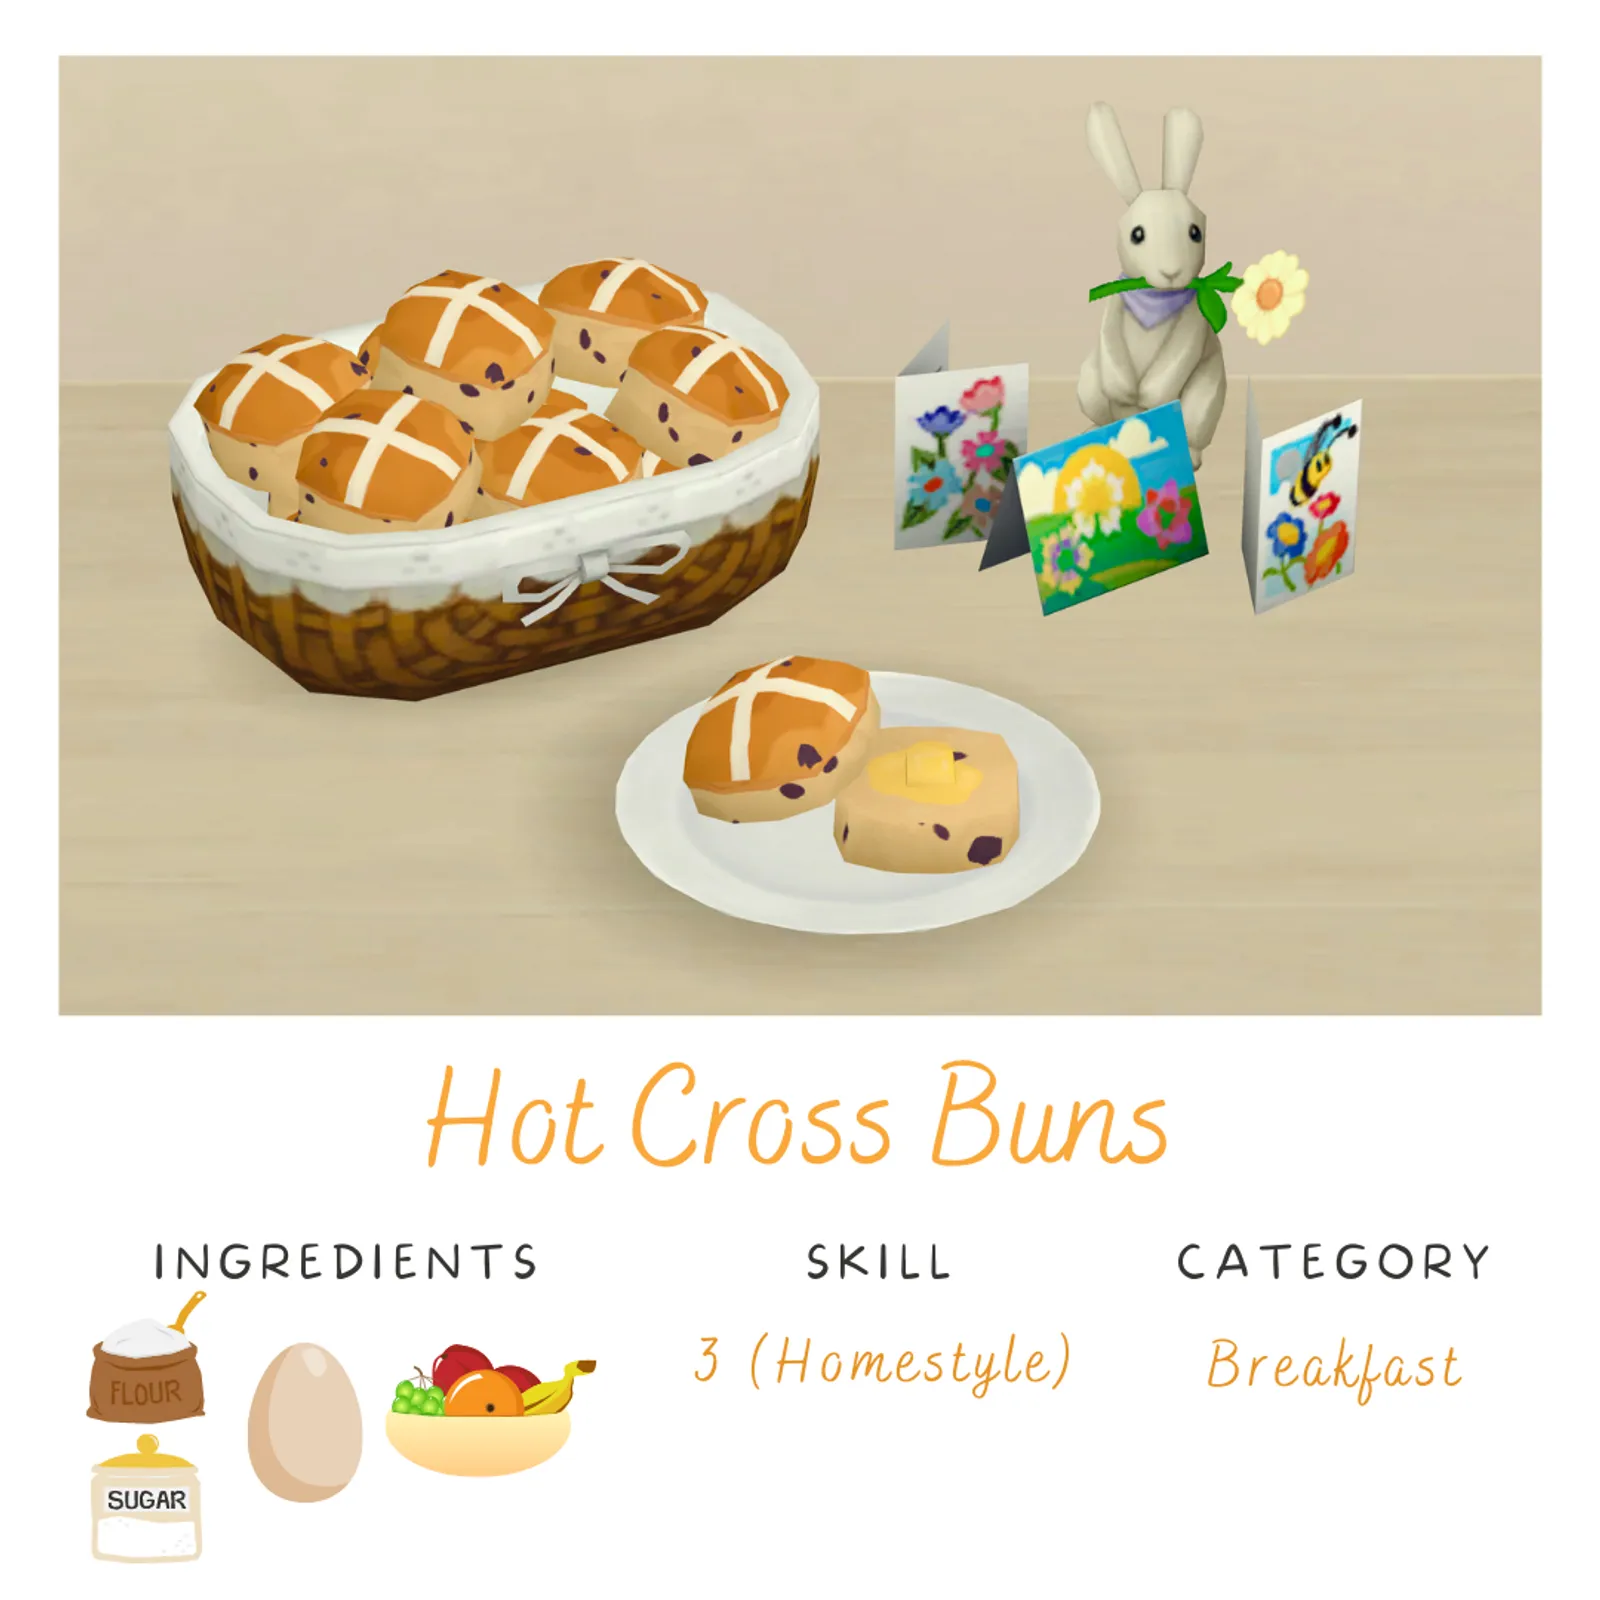 Hot Cross Buns - Easter/Spring Day Treat #2!